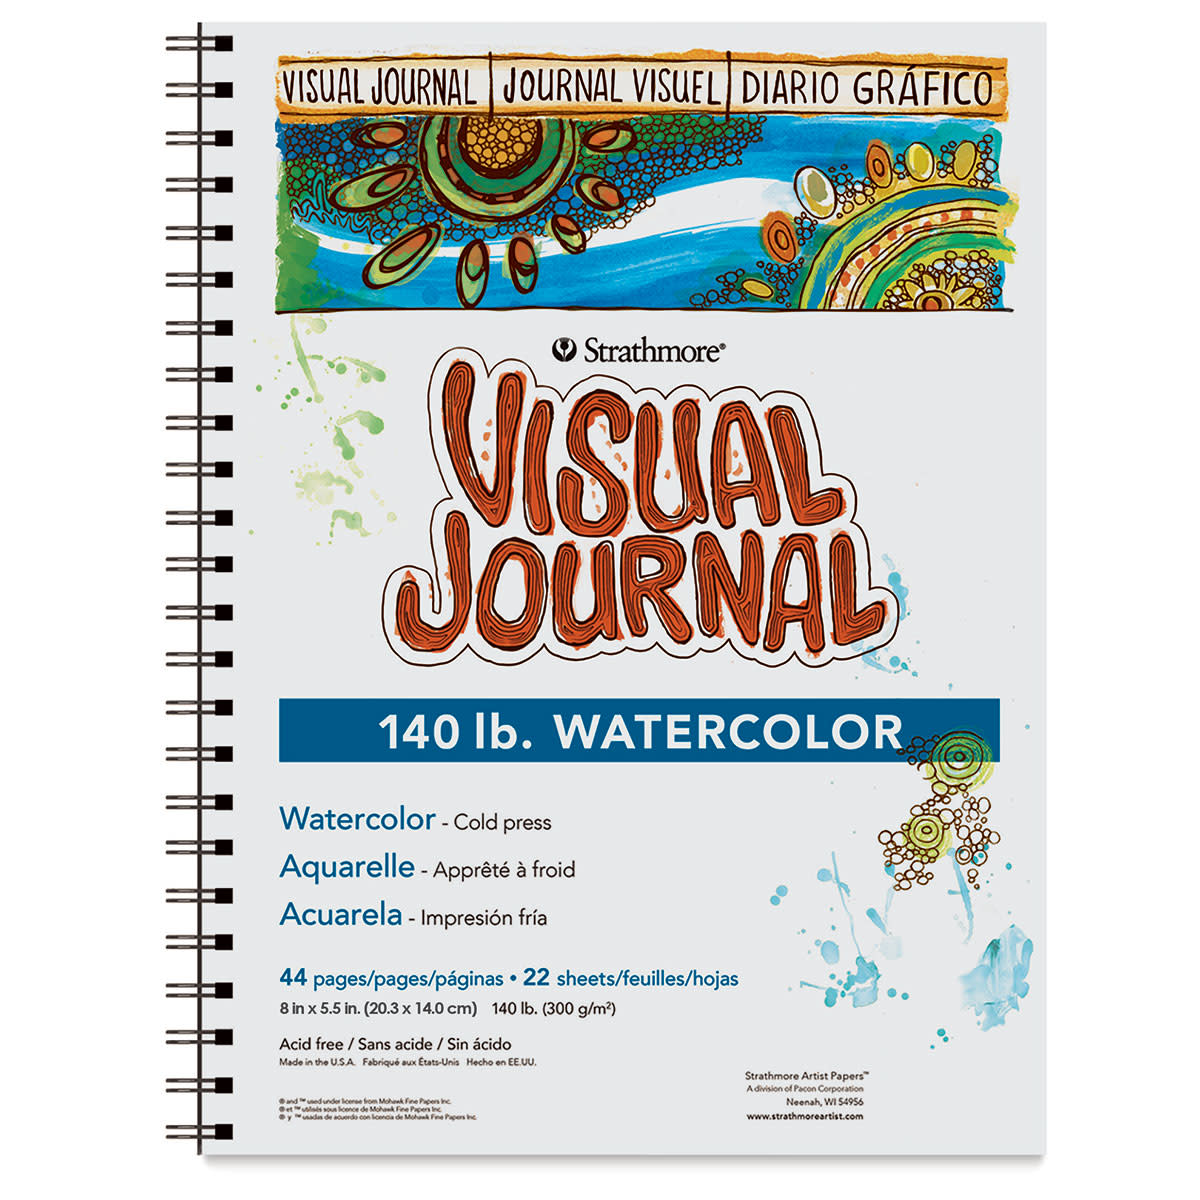 Strathmore Watercolor Visual Journal - 140 lb, 8in x 5.5in